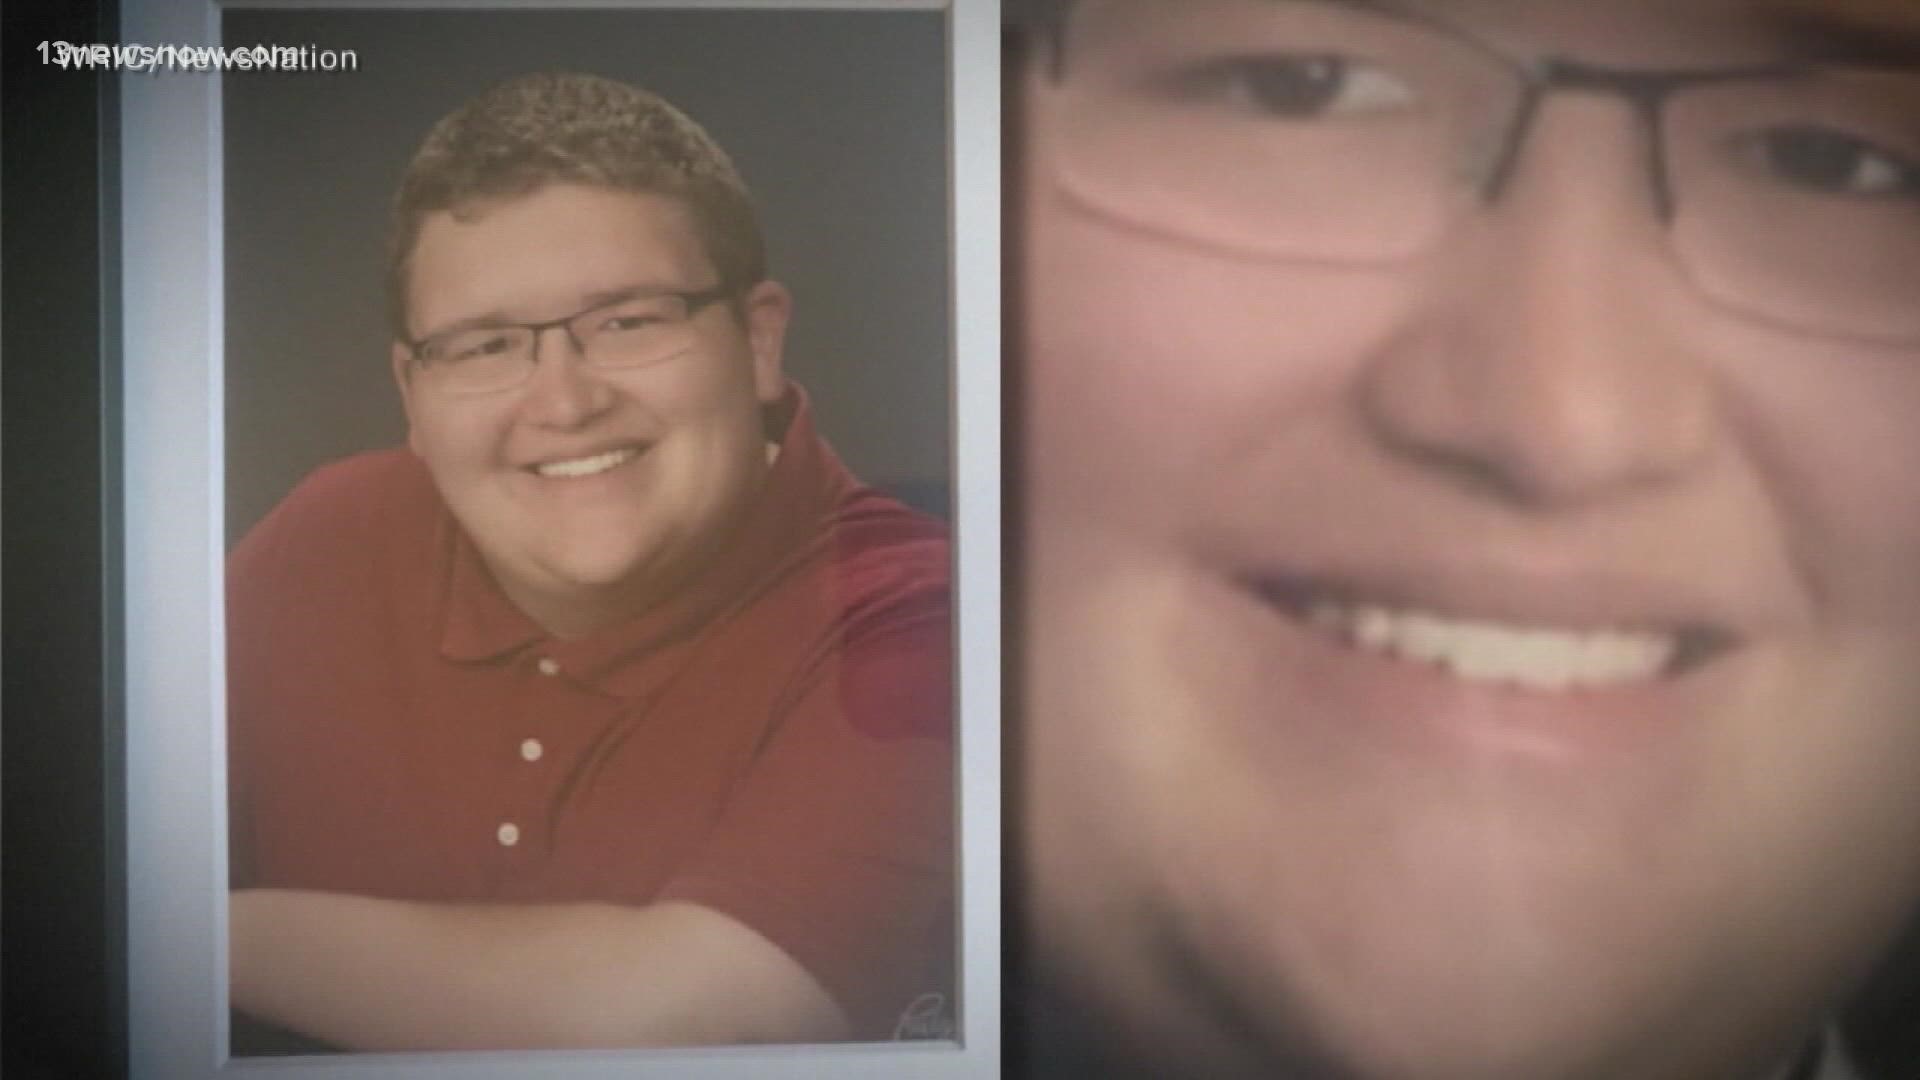 Adam Oakes died last February from alcohol poisoning during a fraternity hazing process.